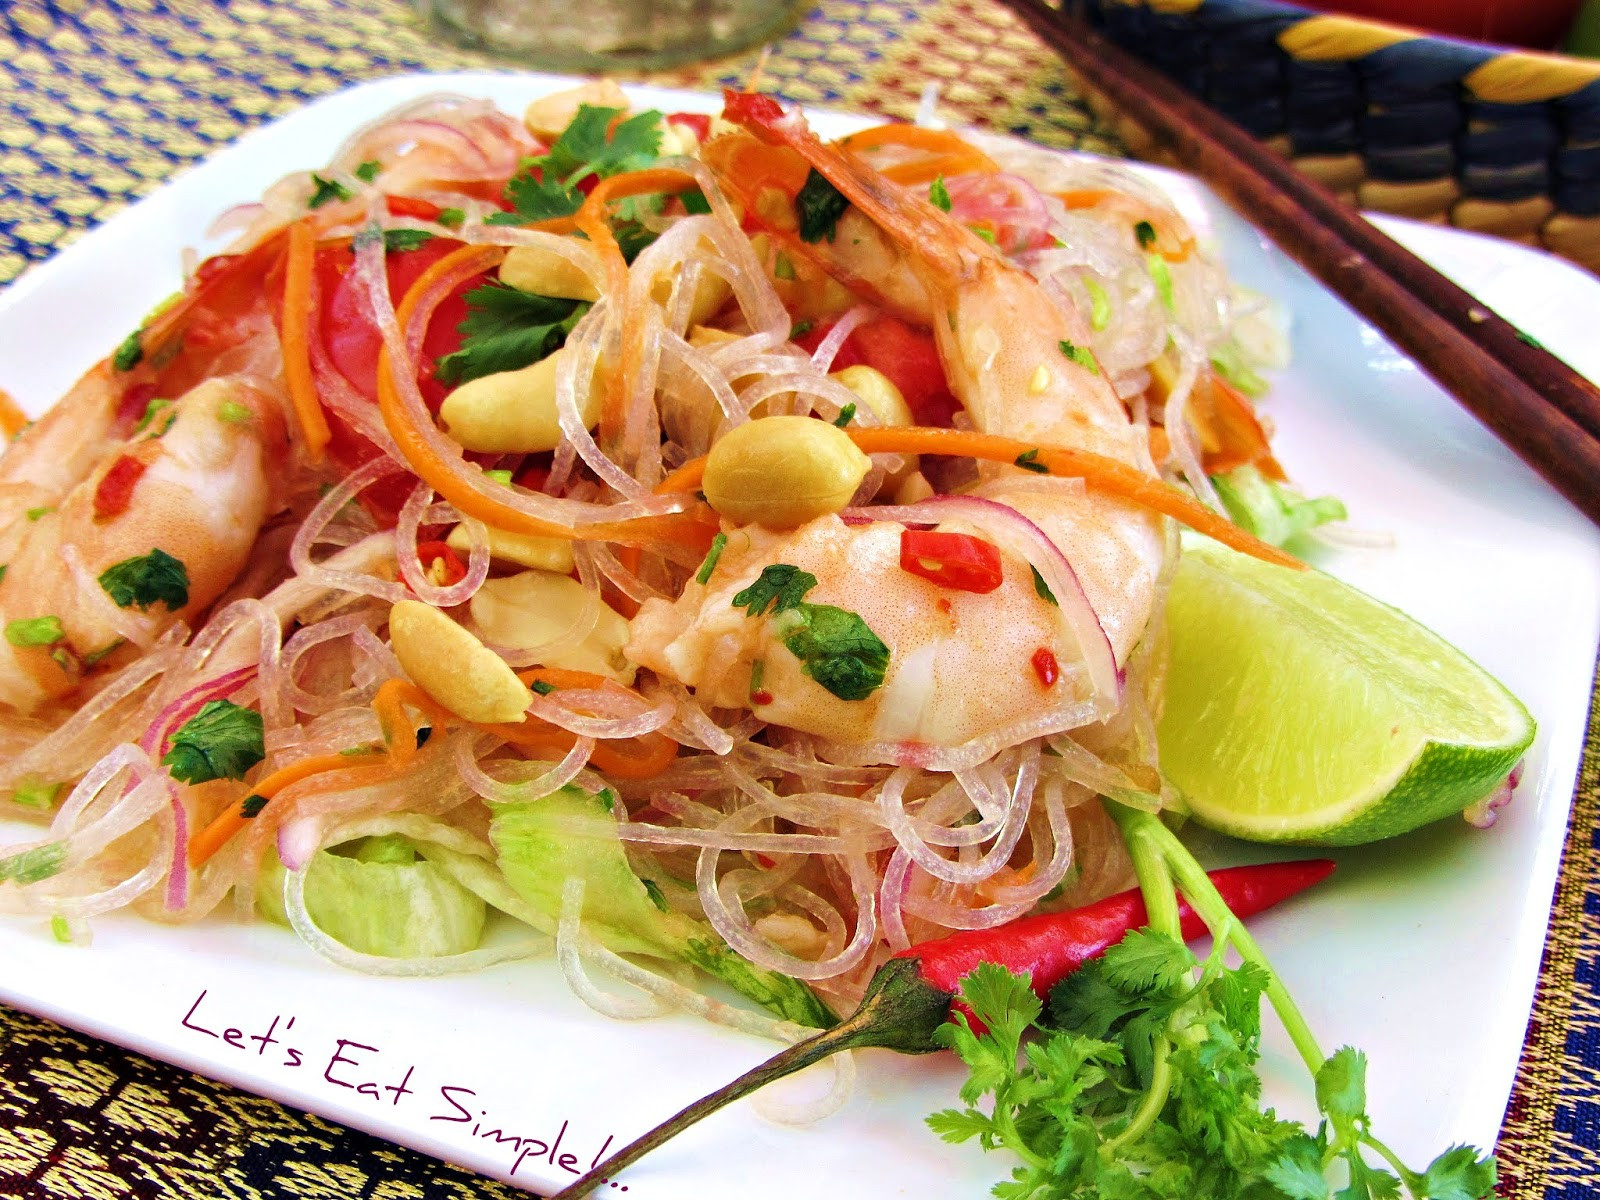 Glass Noodles Salad
 Let s eat mple Yum Woon Sen Goong Thai Spicy